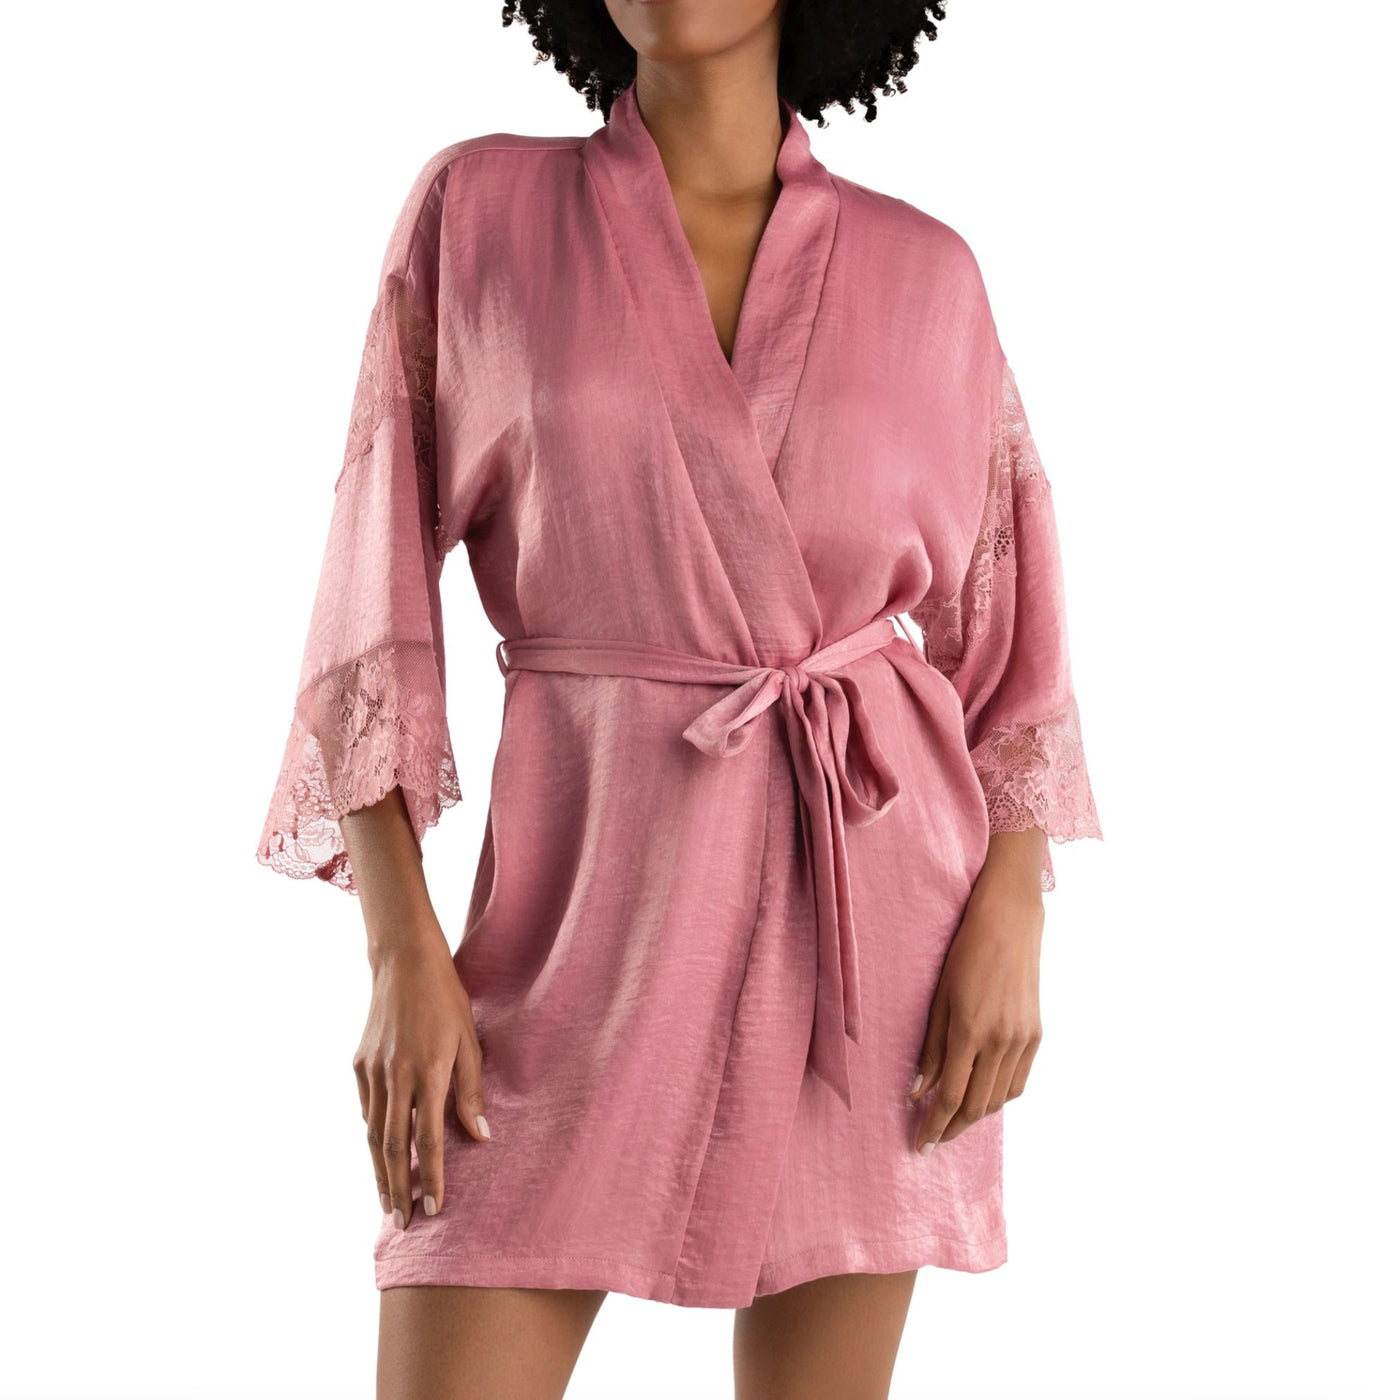 Jonquil Evelyn Wrap in Rose Bruyere EVN030-Robes-Jonquil in Bloom-Rose Bruyere-XSmall/Small-Anna Bella Fine Lingerie, Reveal Your Most Gorgeous Self!